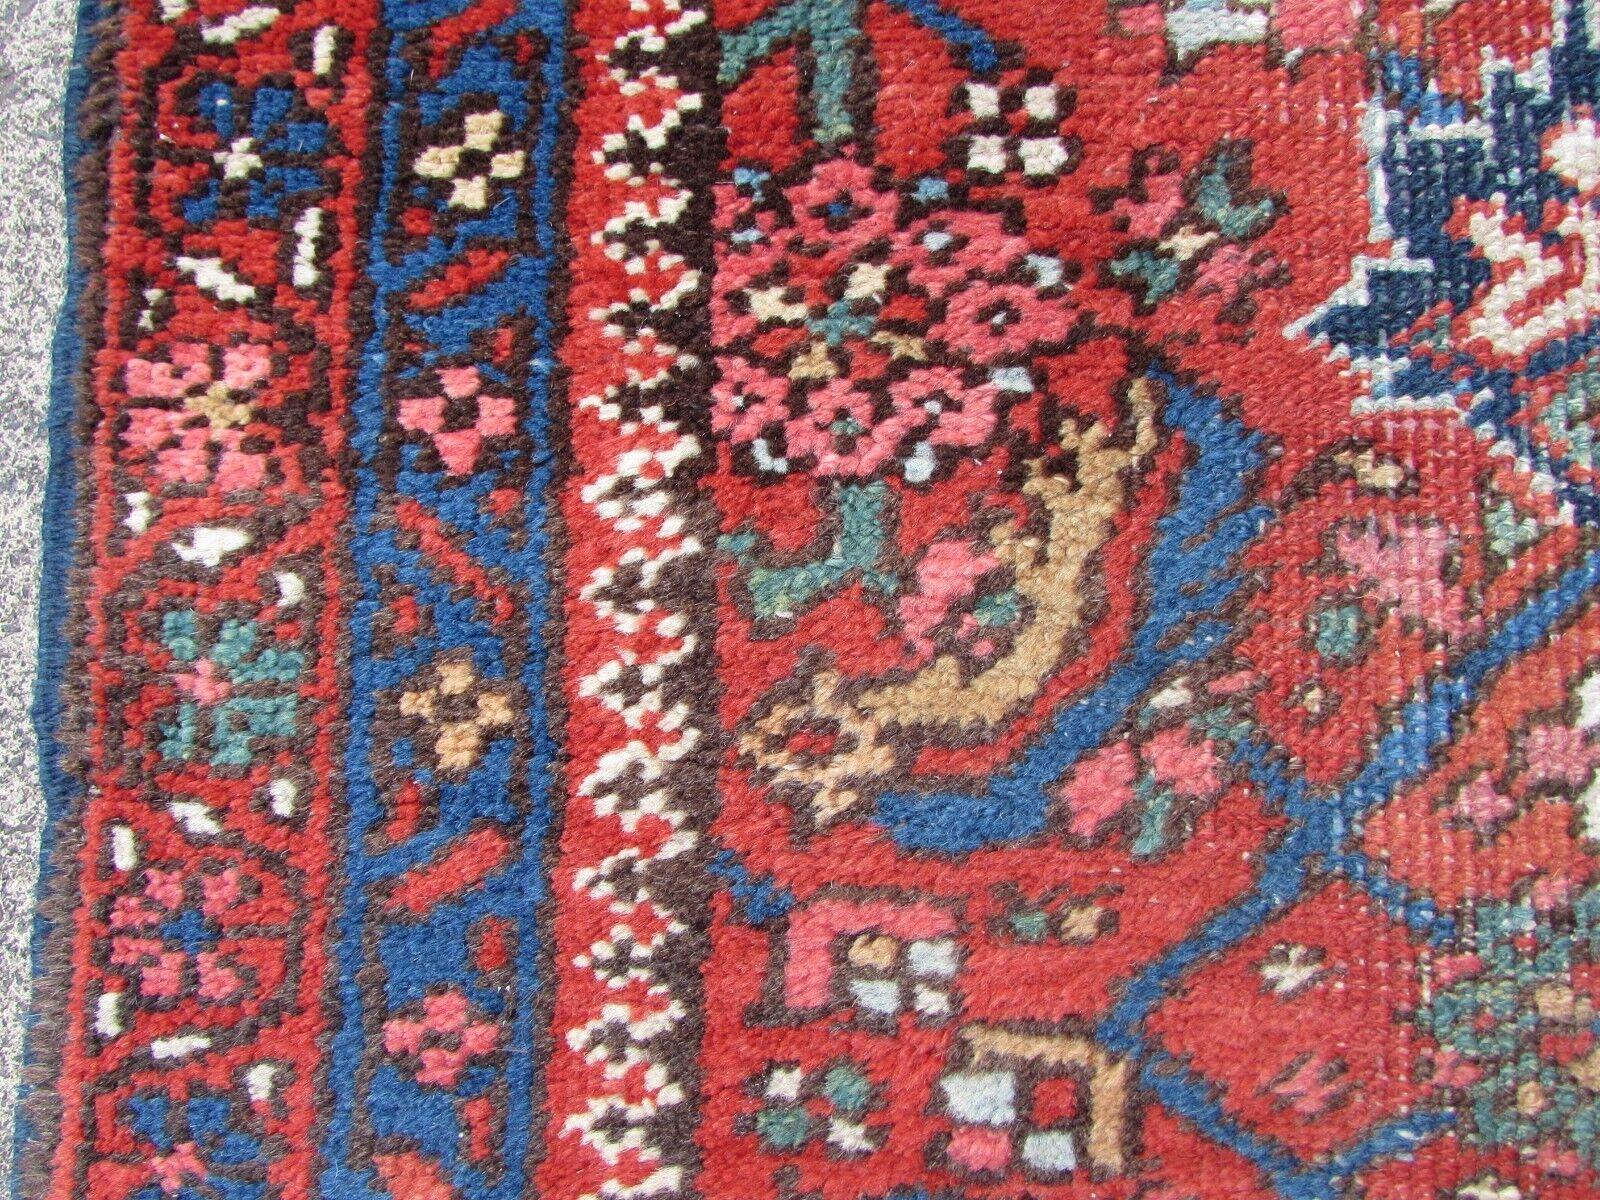 Handmade Antique Persian Style Mahal Runner Rug 2.5' x 12.1', 1920s, 1Q57 For Sale 1